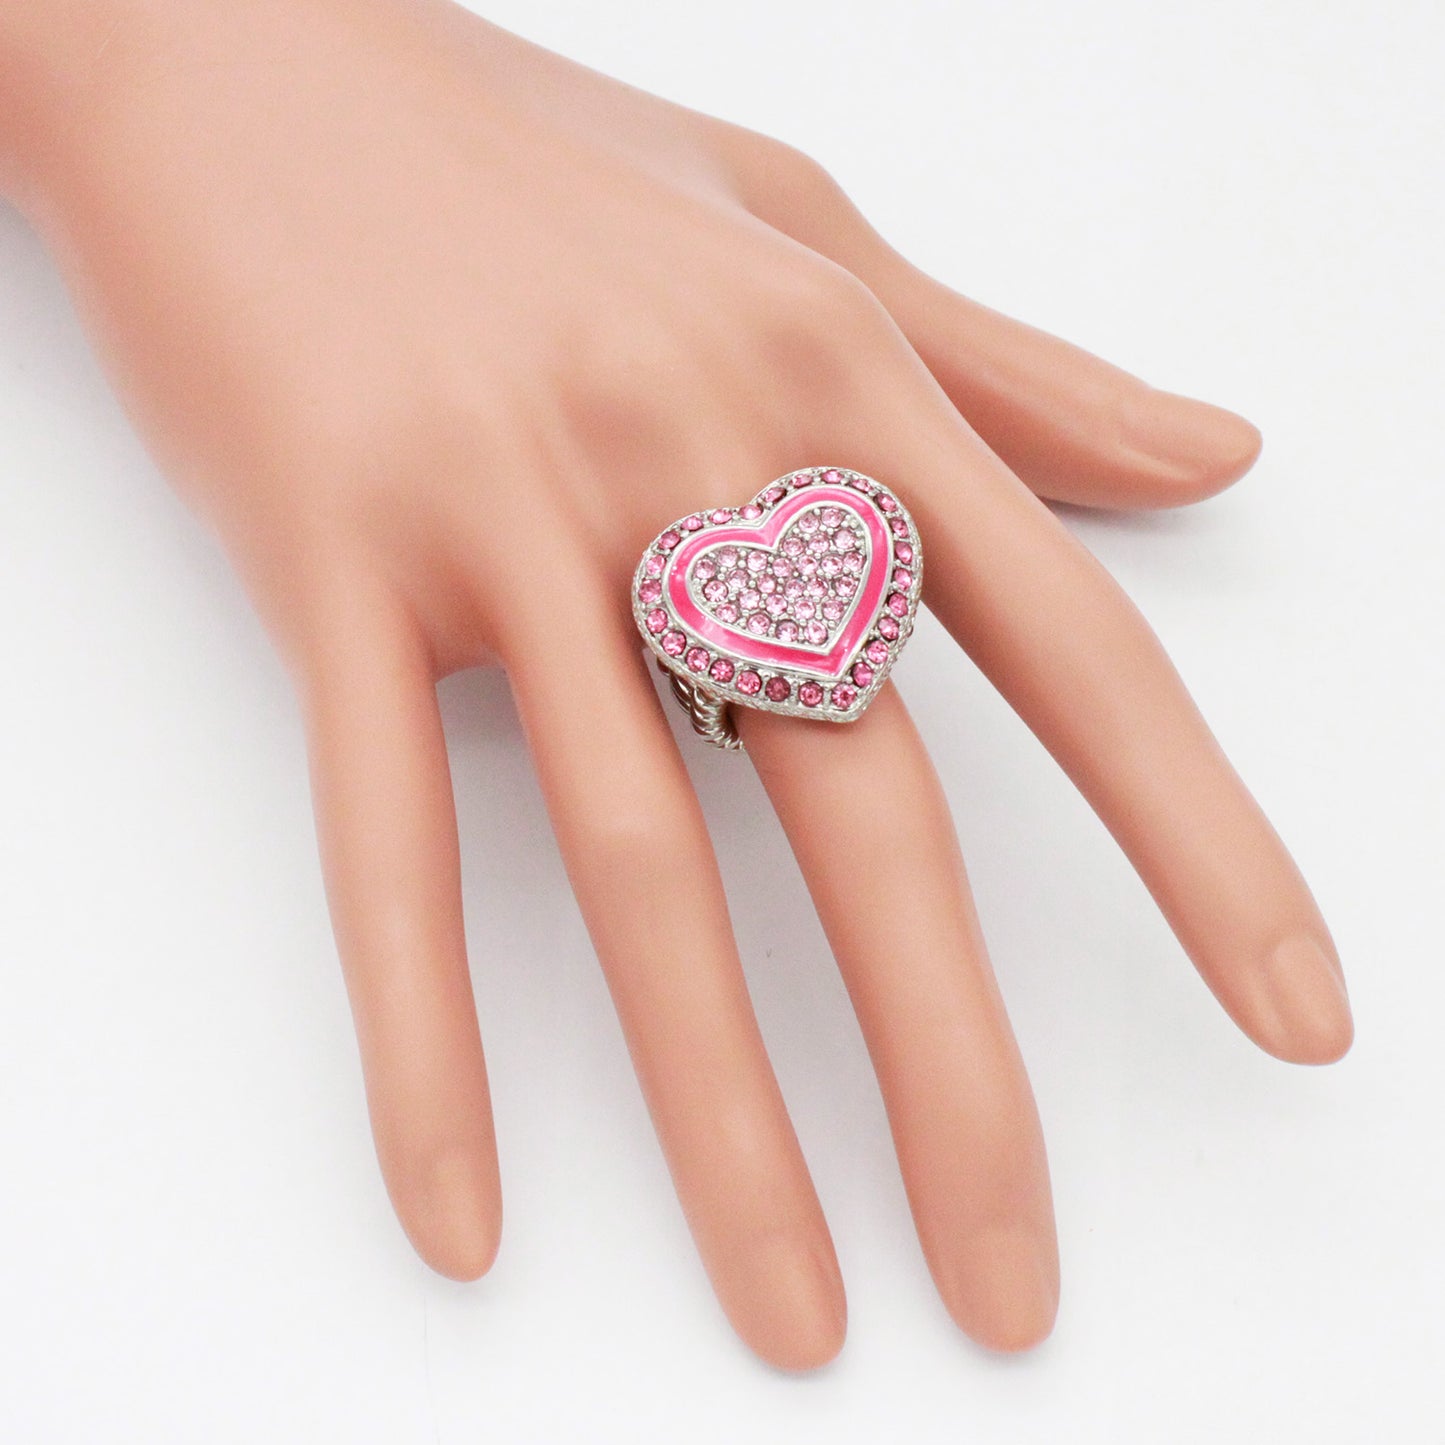 Lavencious Heart Shaped Rhinestones Stretch Rings for Women Size for 7-9(Pink)